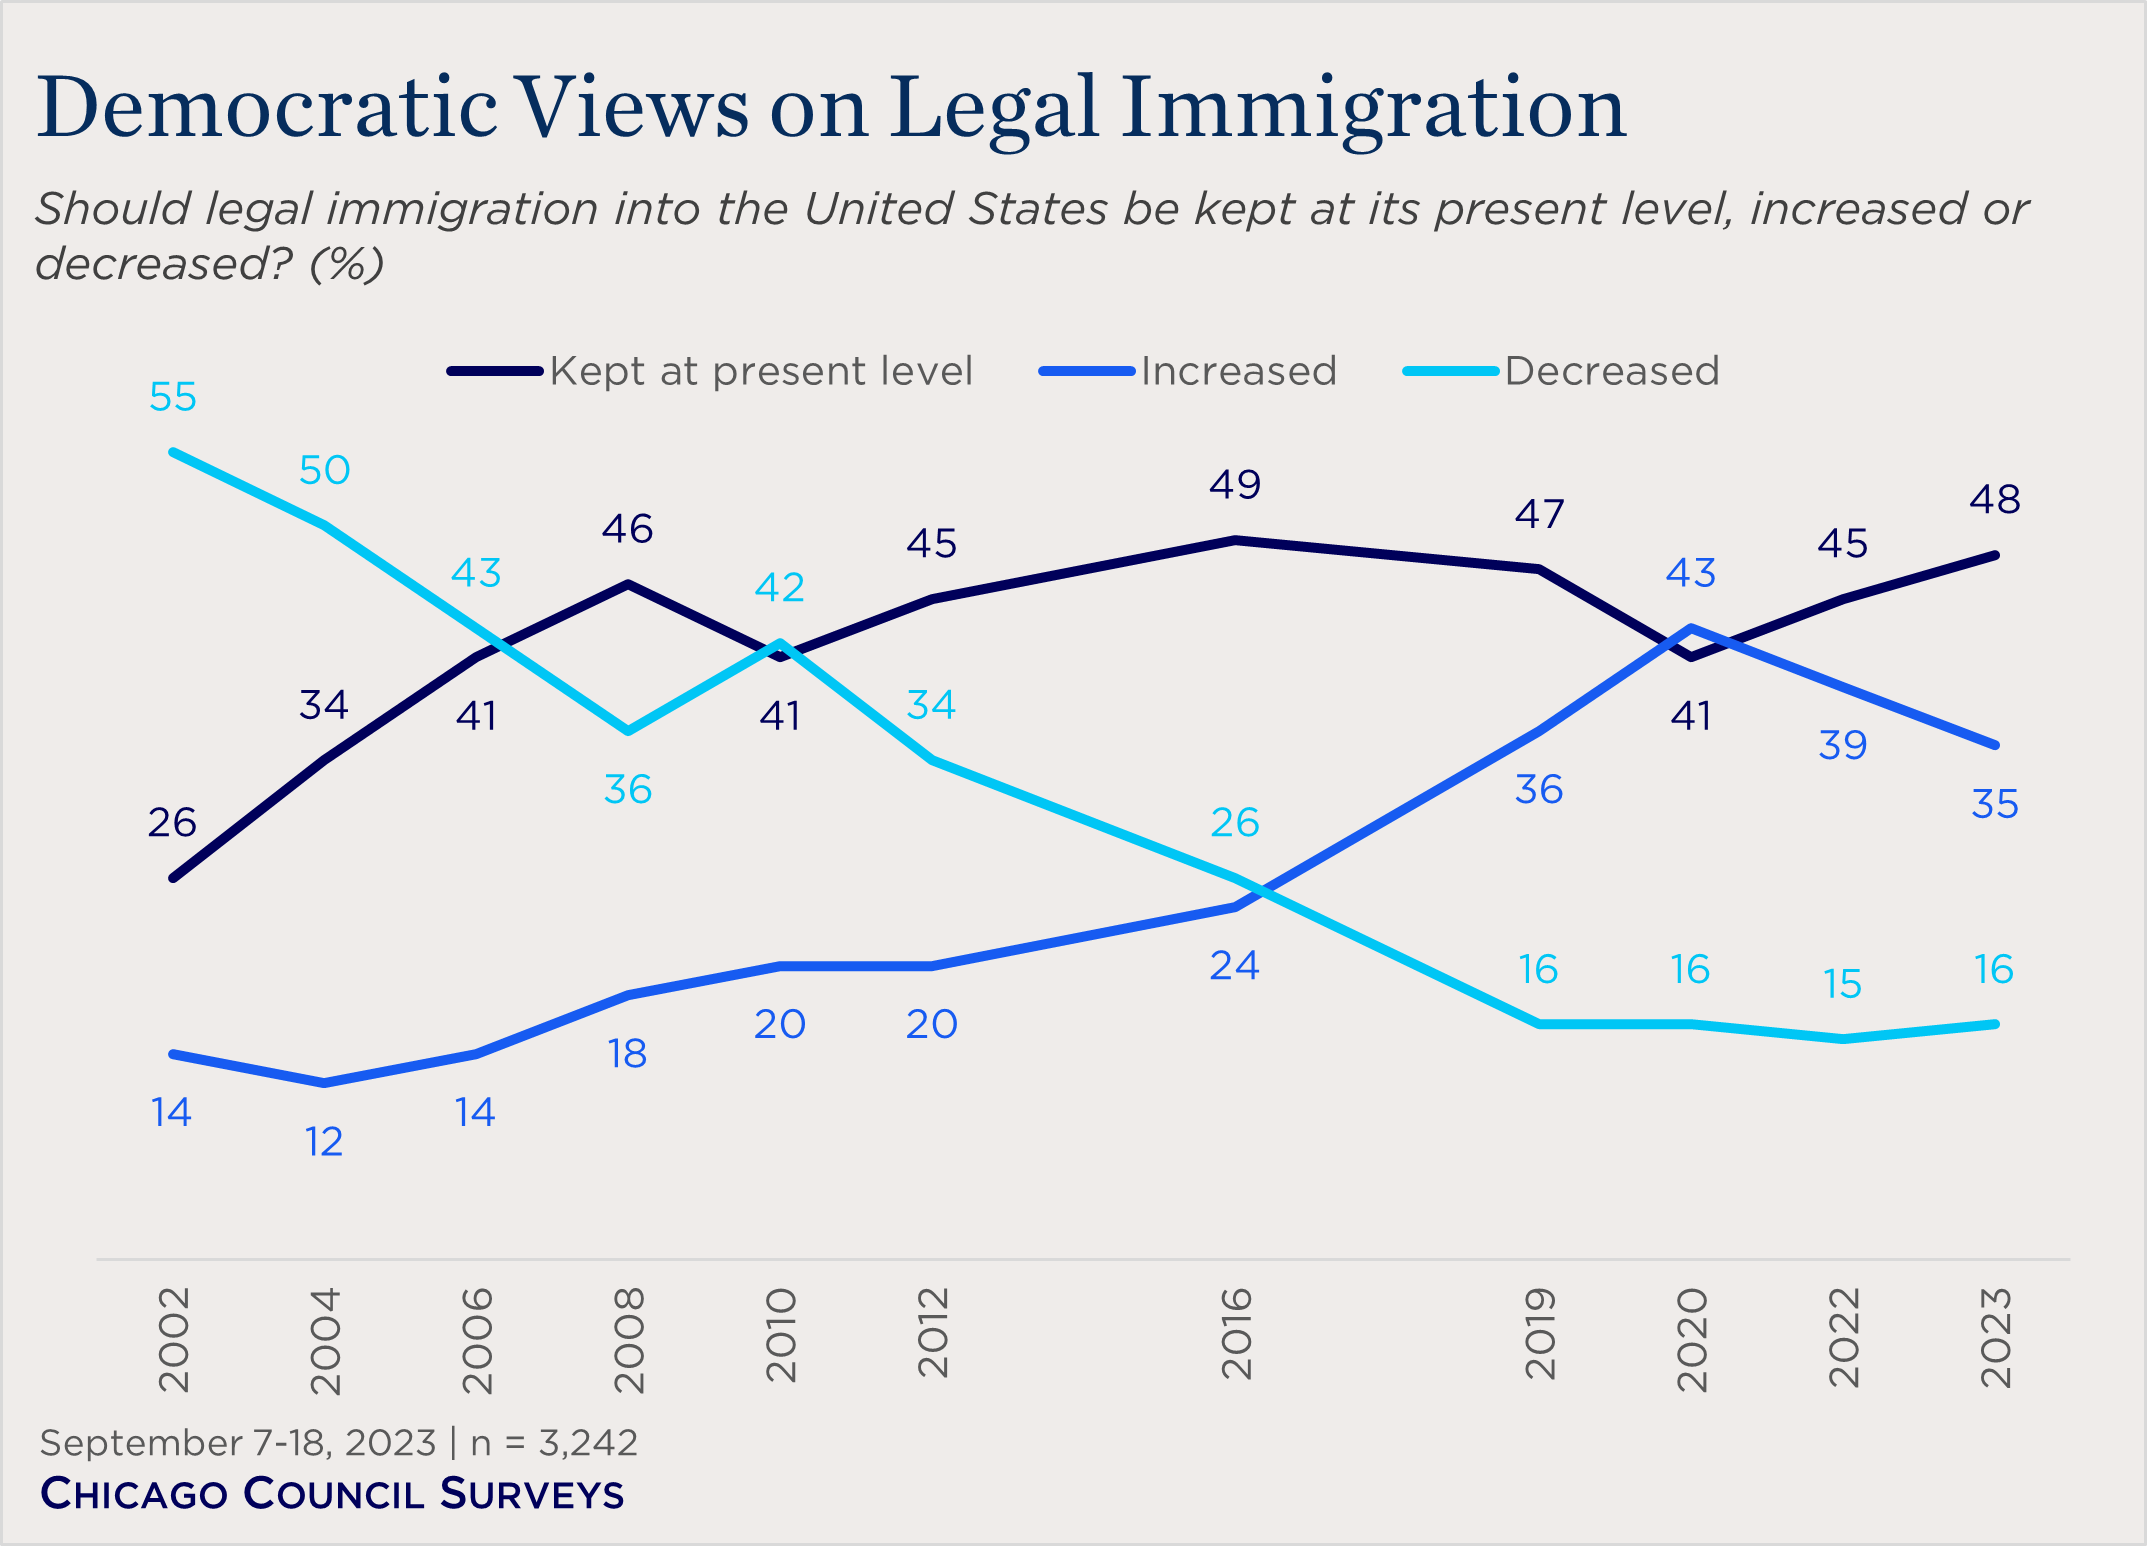 "line chart showing Democratic views on legal immigration"